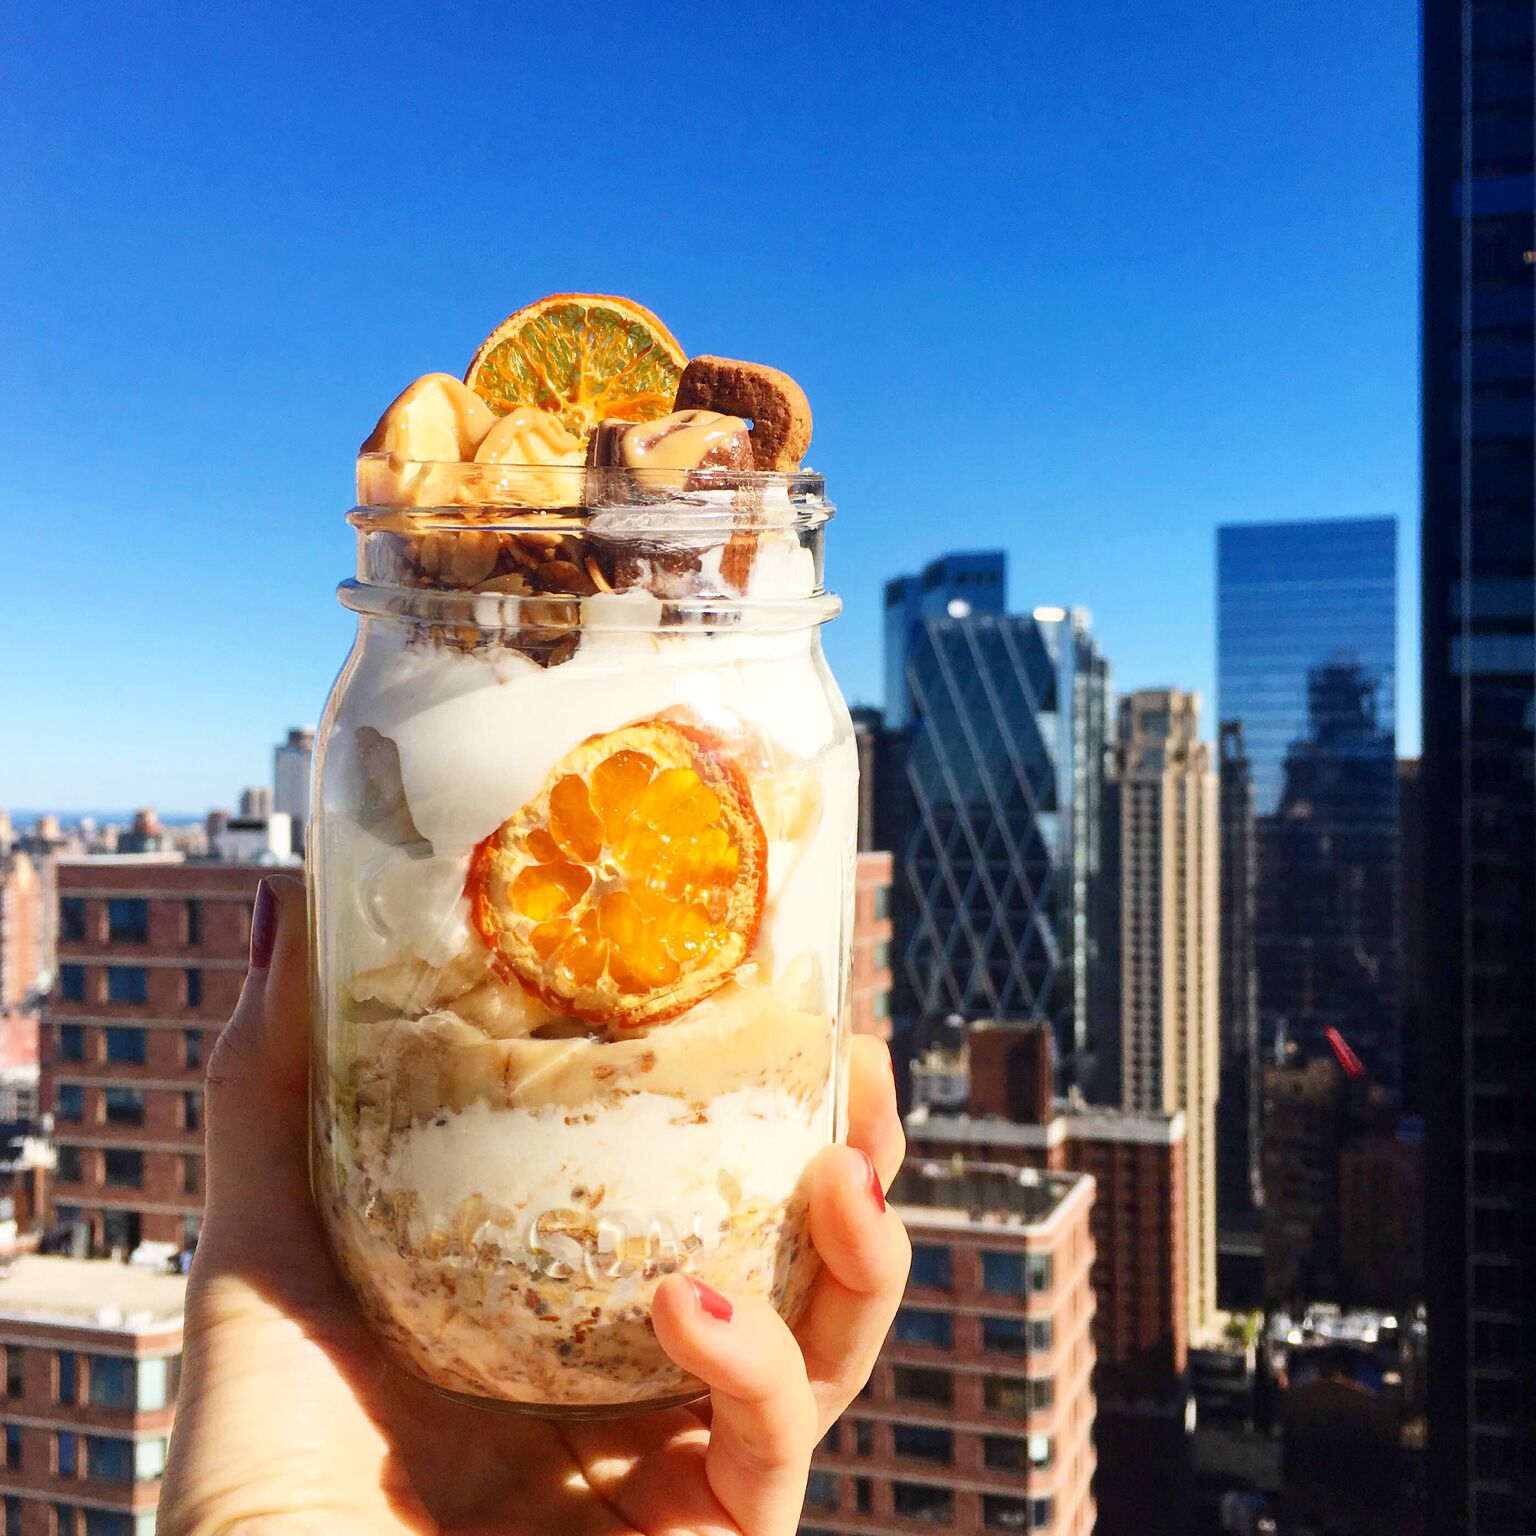 Banana & Peanut butter Parfait Made with Smoothie Mix